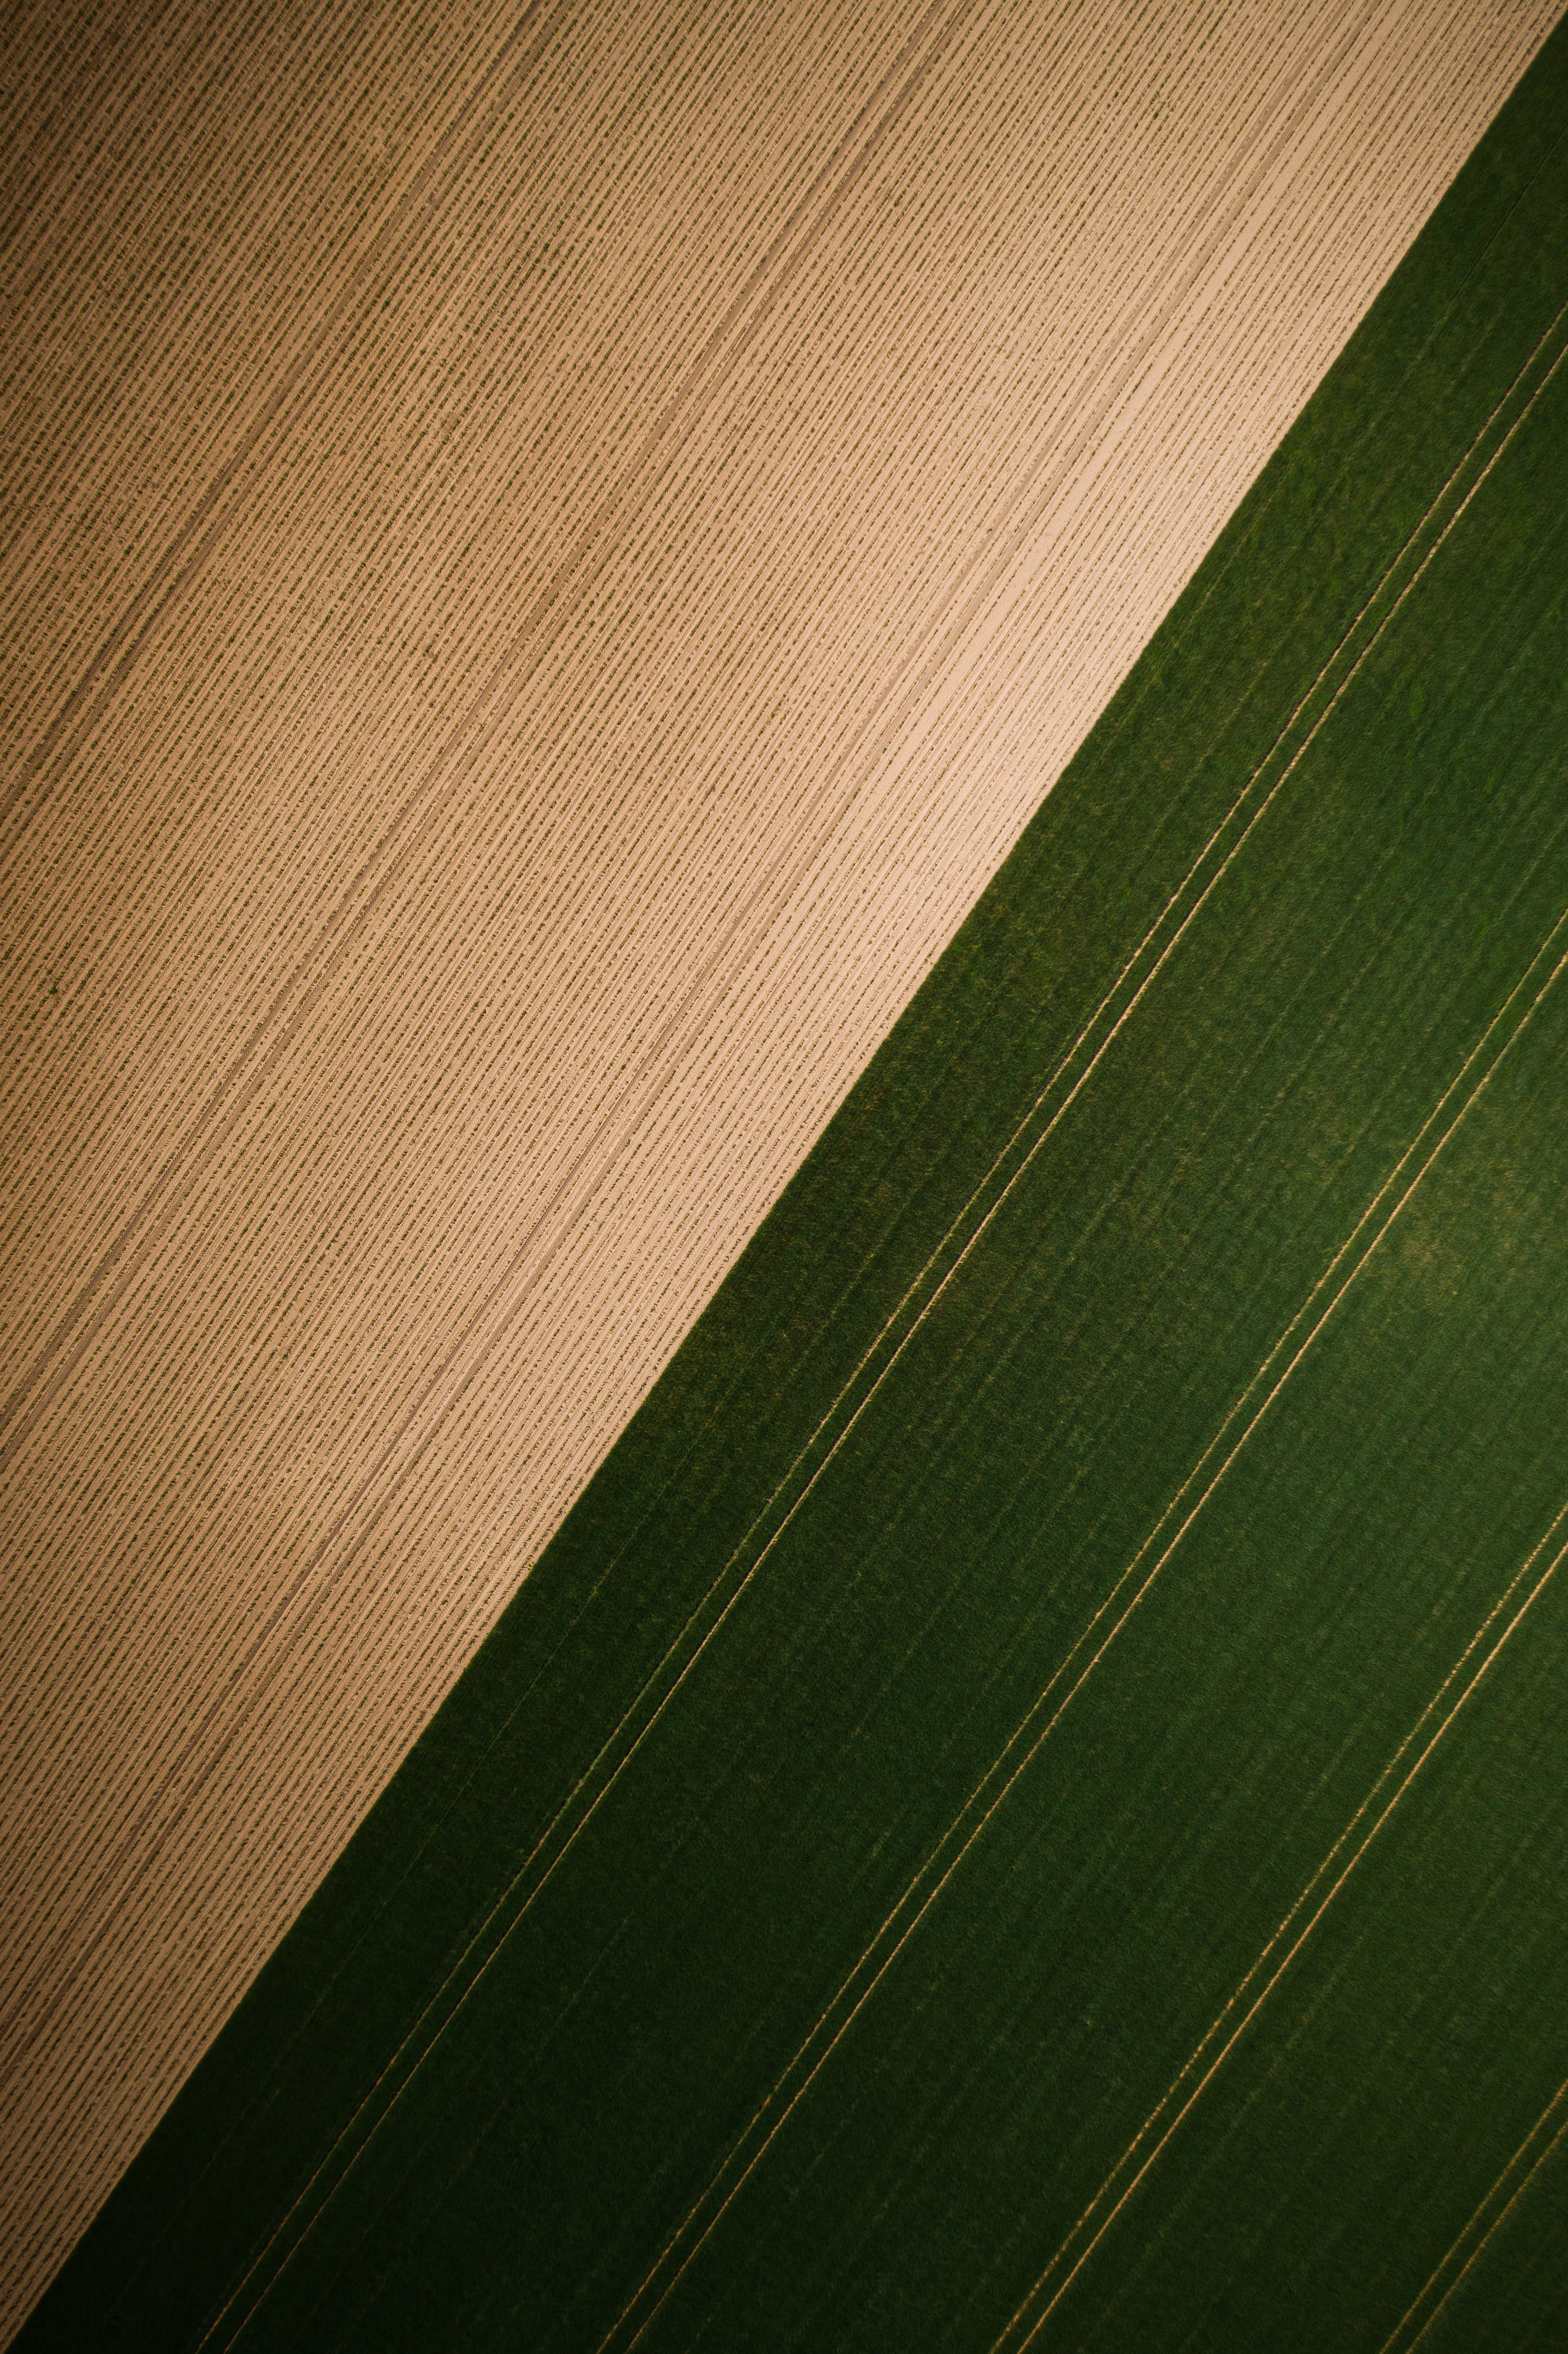 streaks, stripes, textures, grass, view from above, texture, field